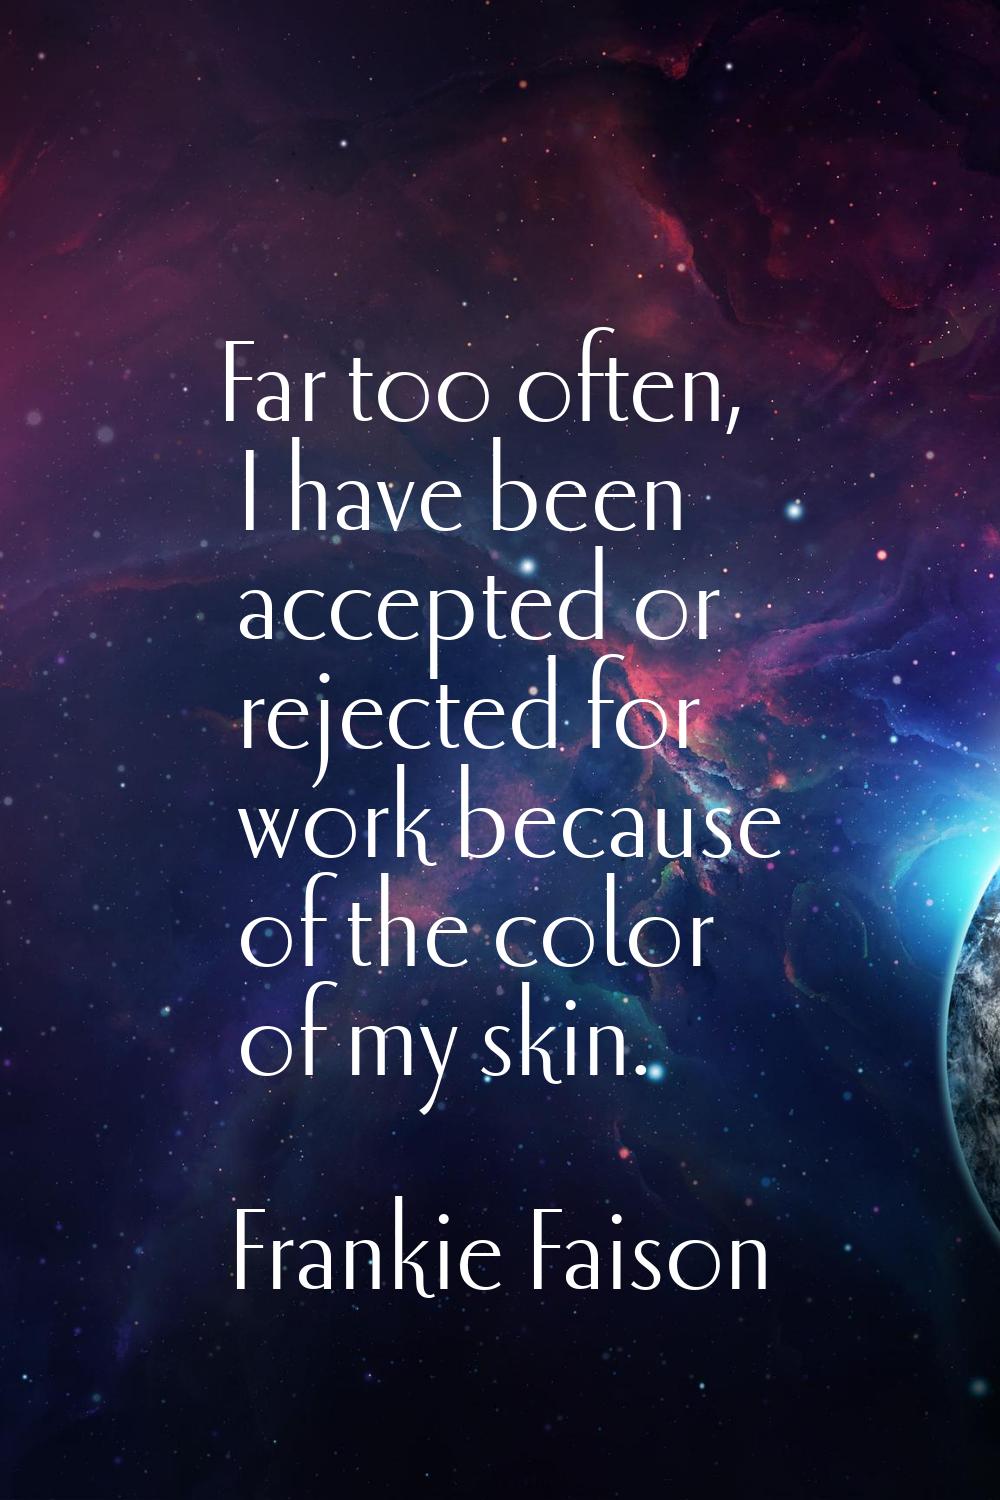 Far too often, I have been accepted or rejected for work because of the color of my skin.